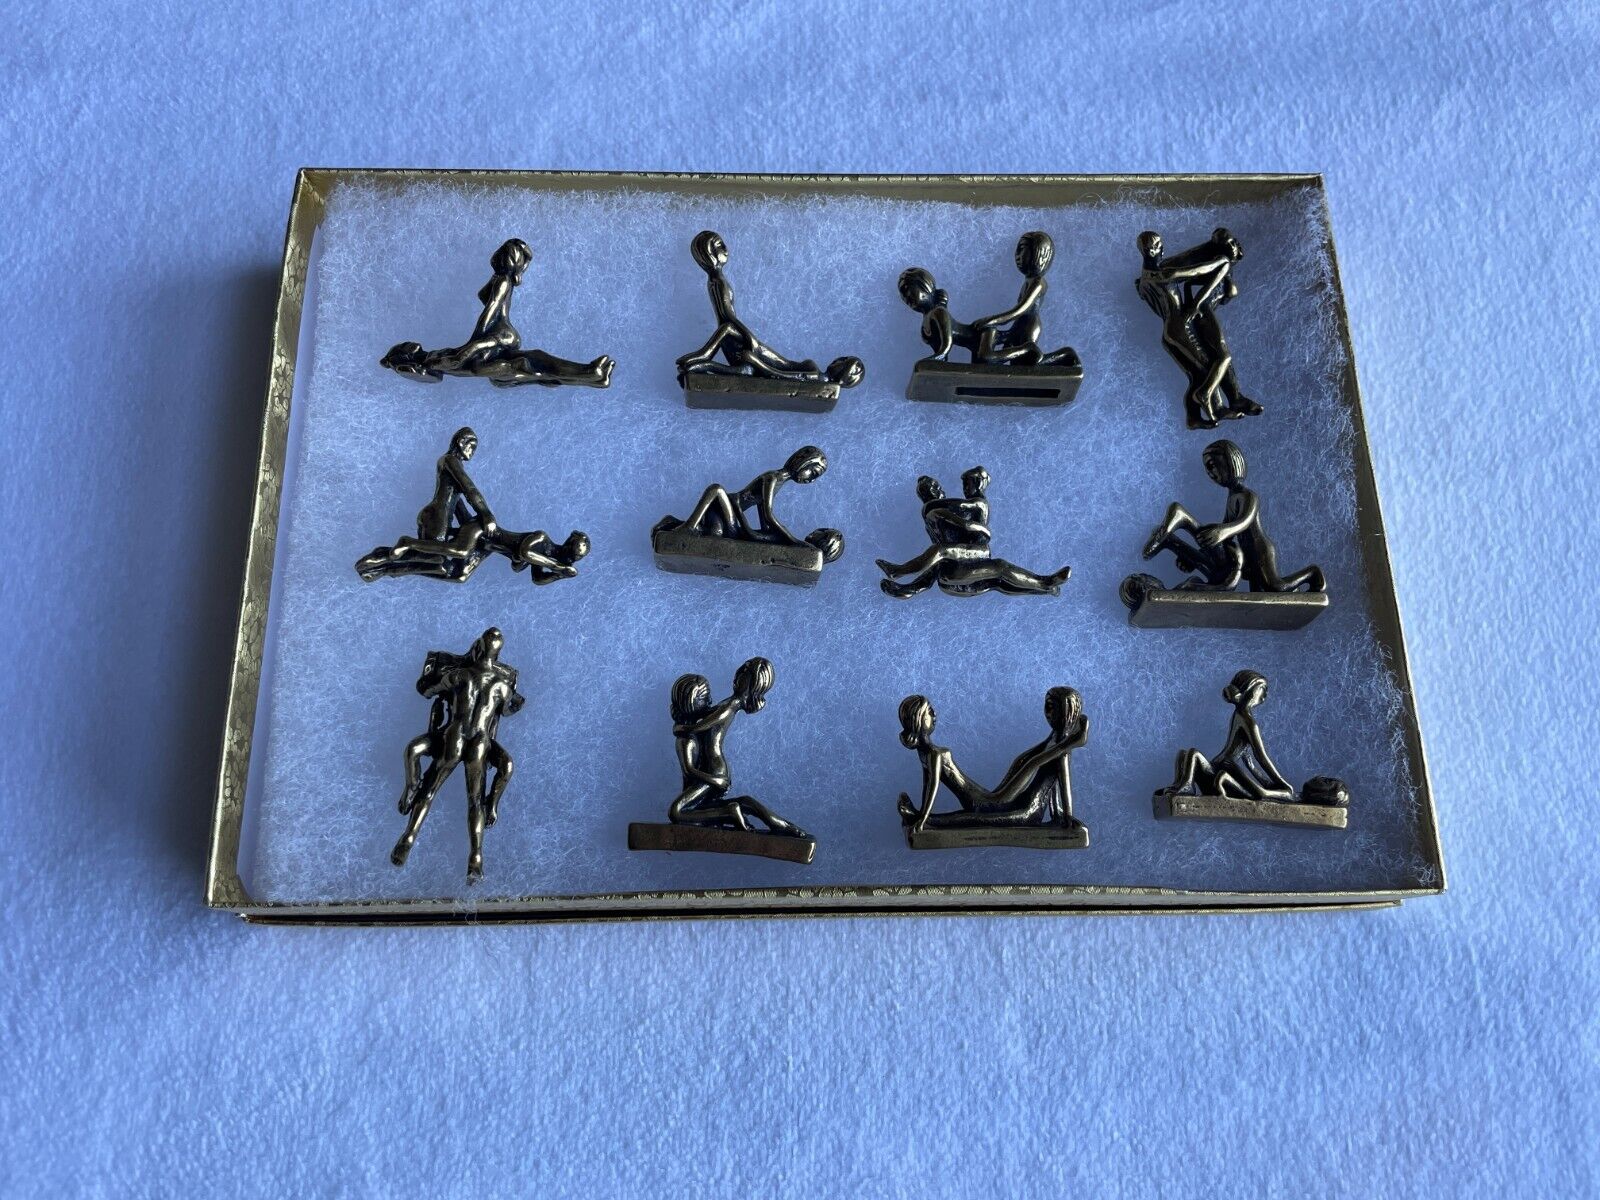 Full set of  Brass Man and Woman Making Love Figurines 12 pcs